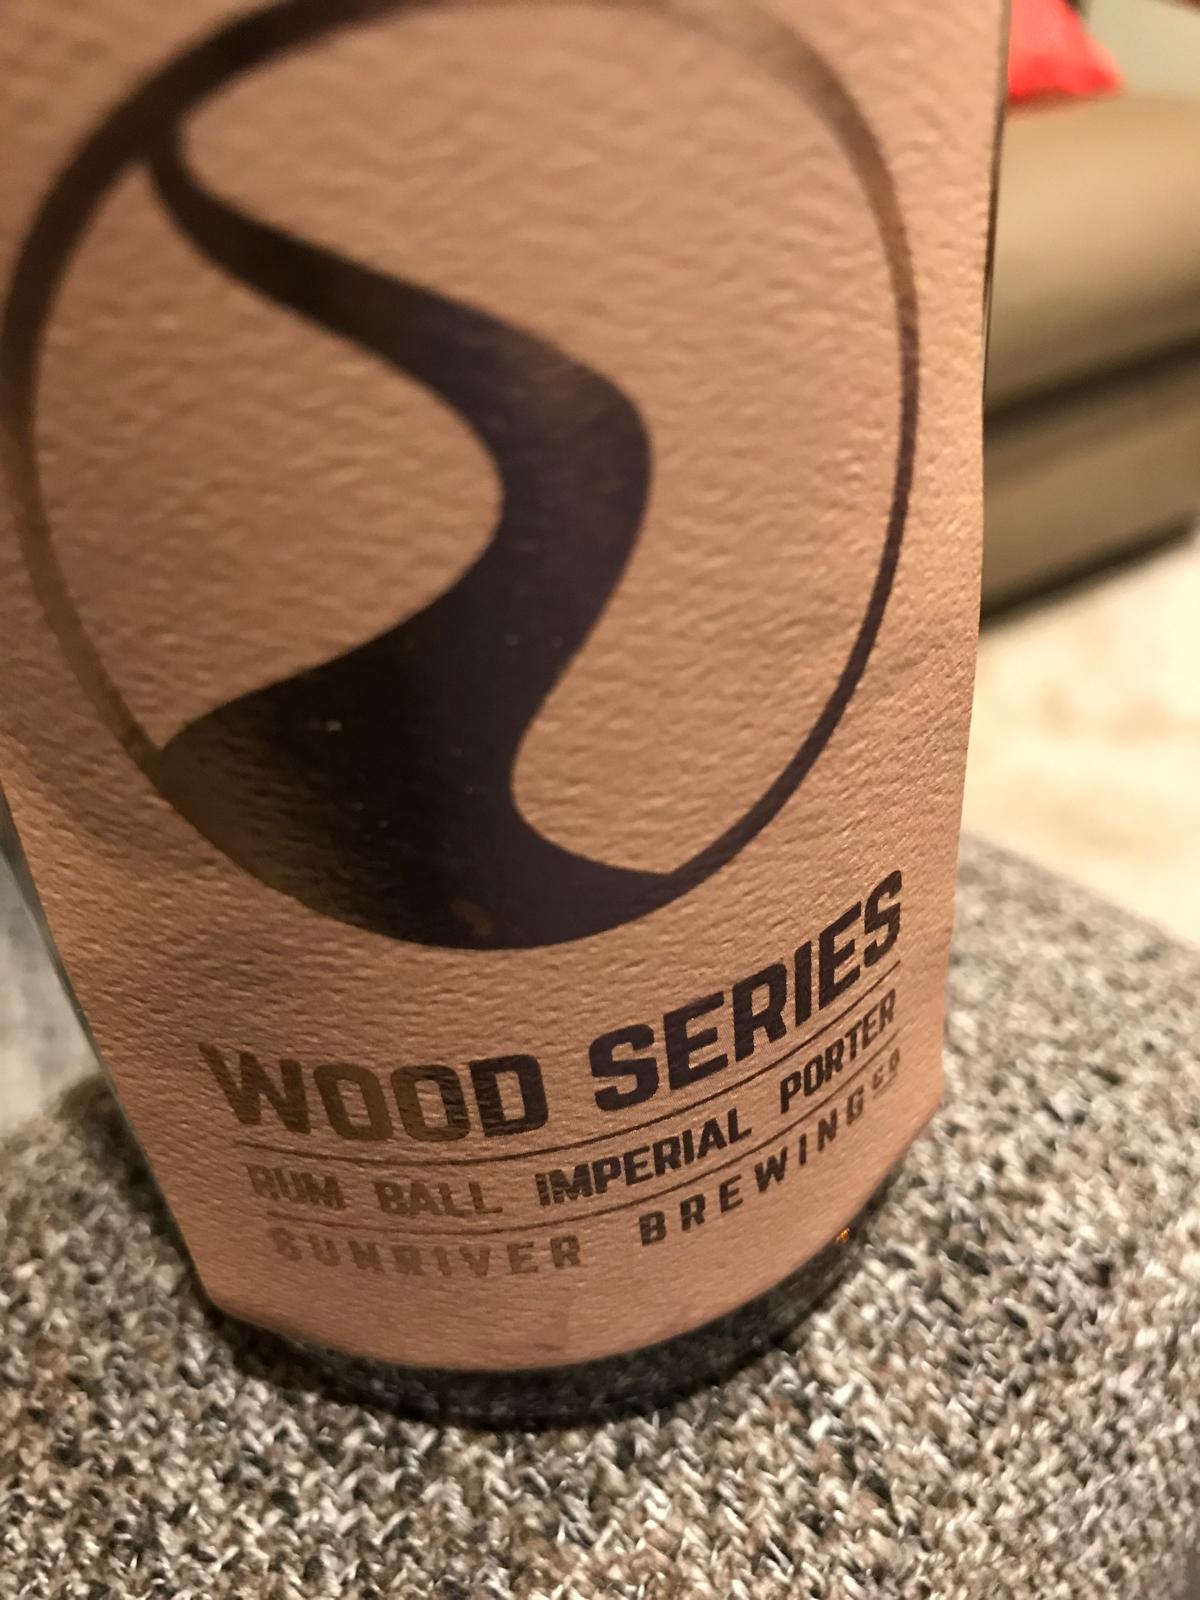 Wood Series: Rum Ball Imperial Porter